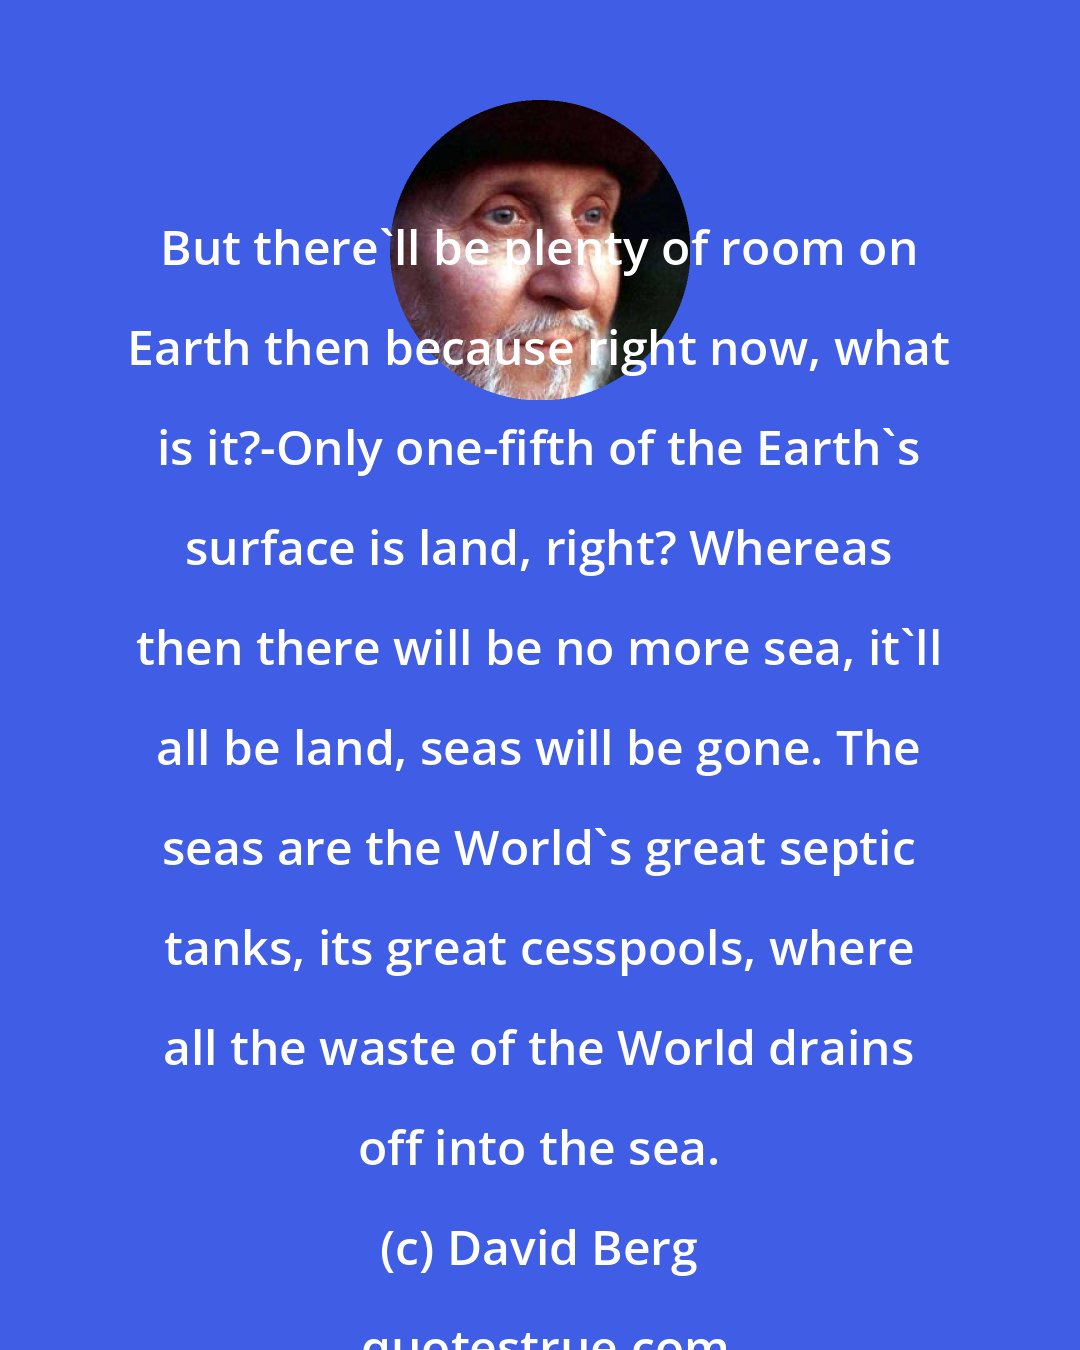 David Berg: But there'll be plenty of room on Earth then because right now, what is it?-Only one-fifth of the Earth's surface is land, right? Whereas then there will be no more sea, it'll all be land, seas will be gone. The seas are the World's great septic tanks, its great cesspools, where all the waste of the World drains off into the sea.